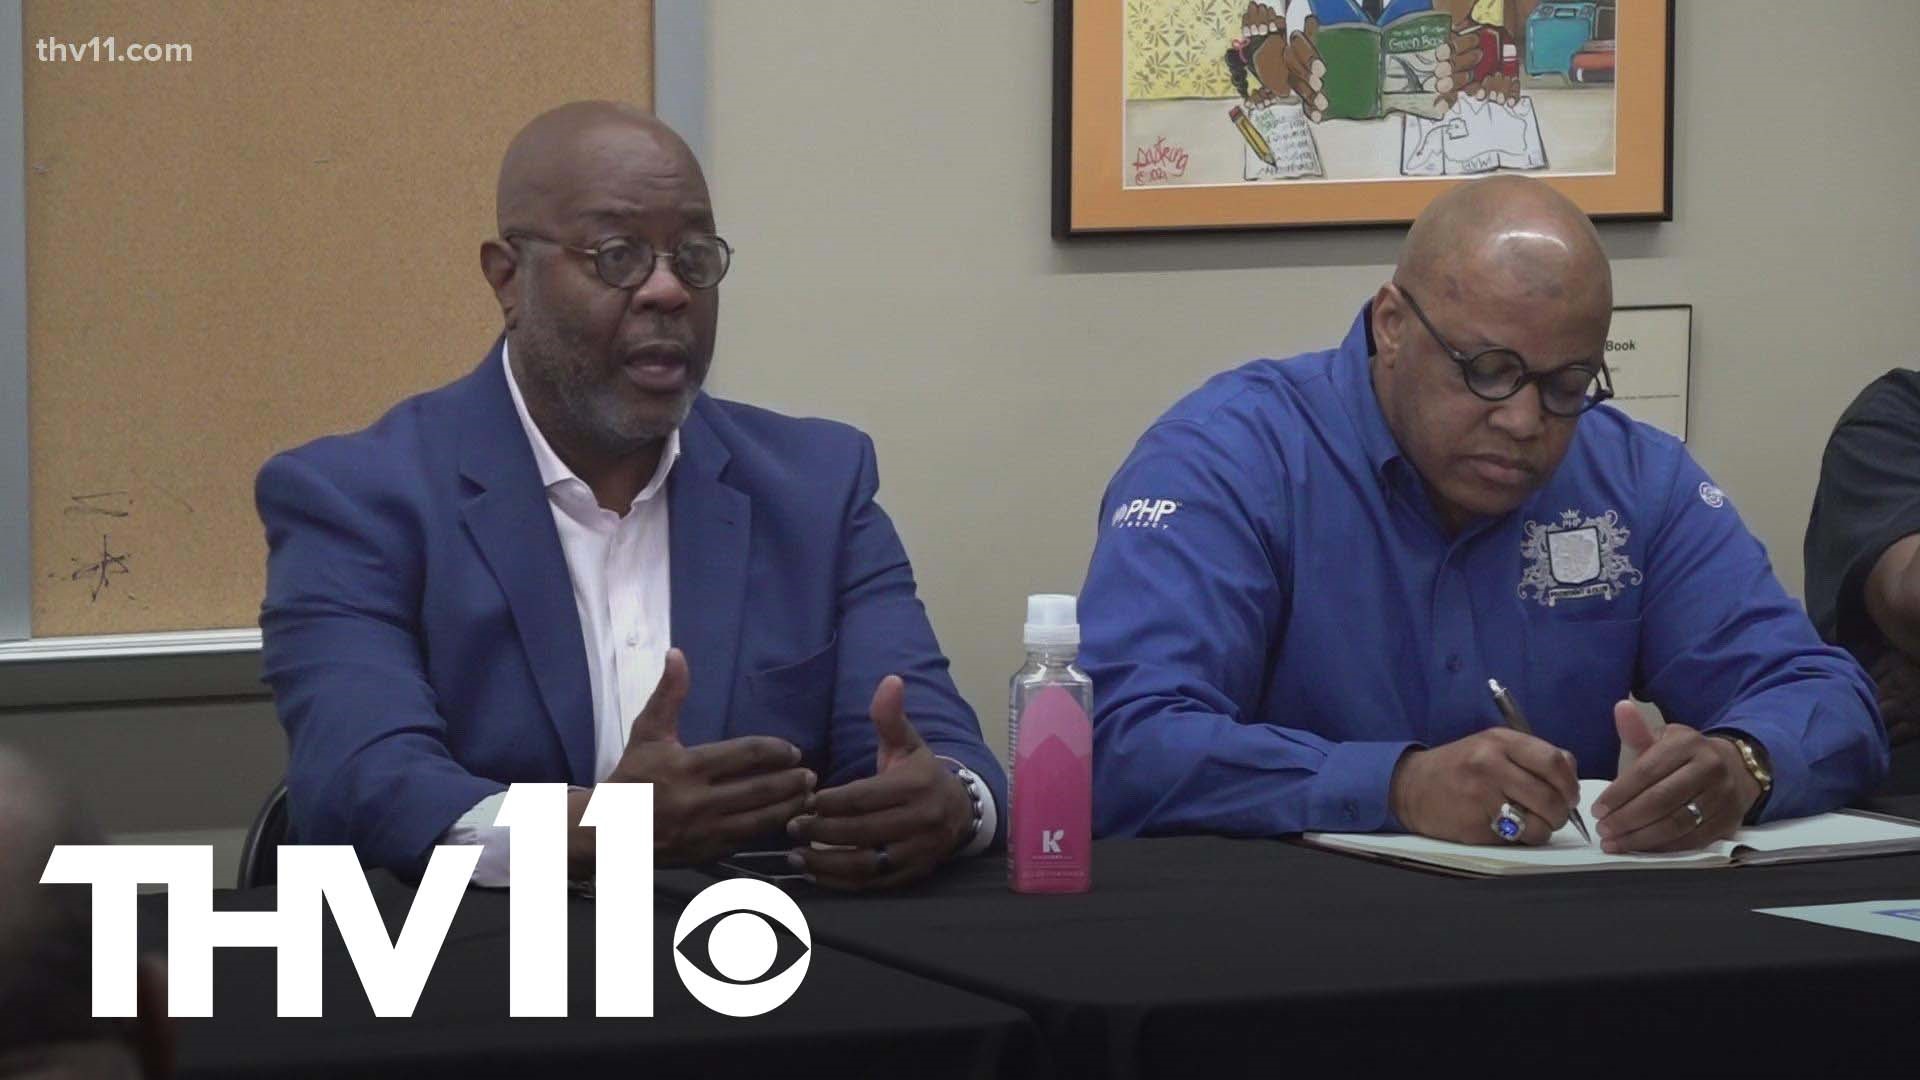 Little Rock city leaders held a public forum to address the violent crime in the city, which often leaves the community wondering what they can do to help.